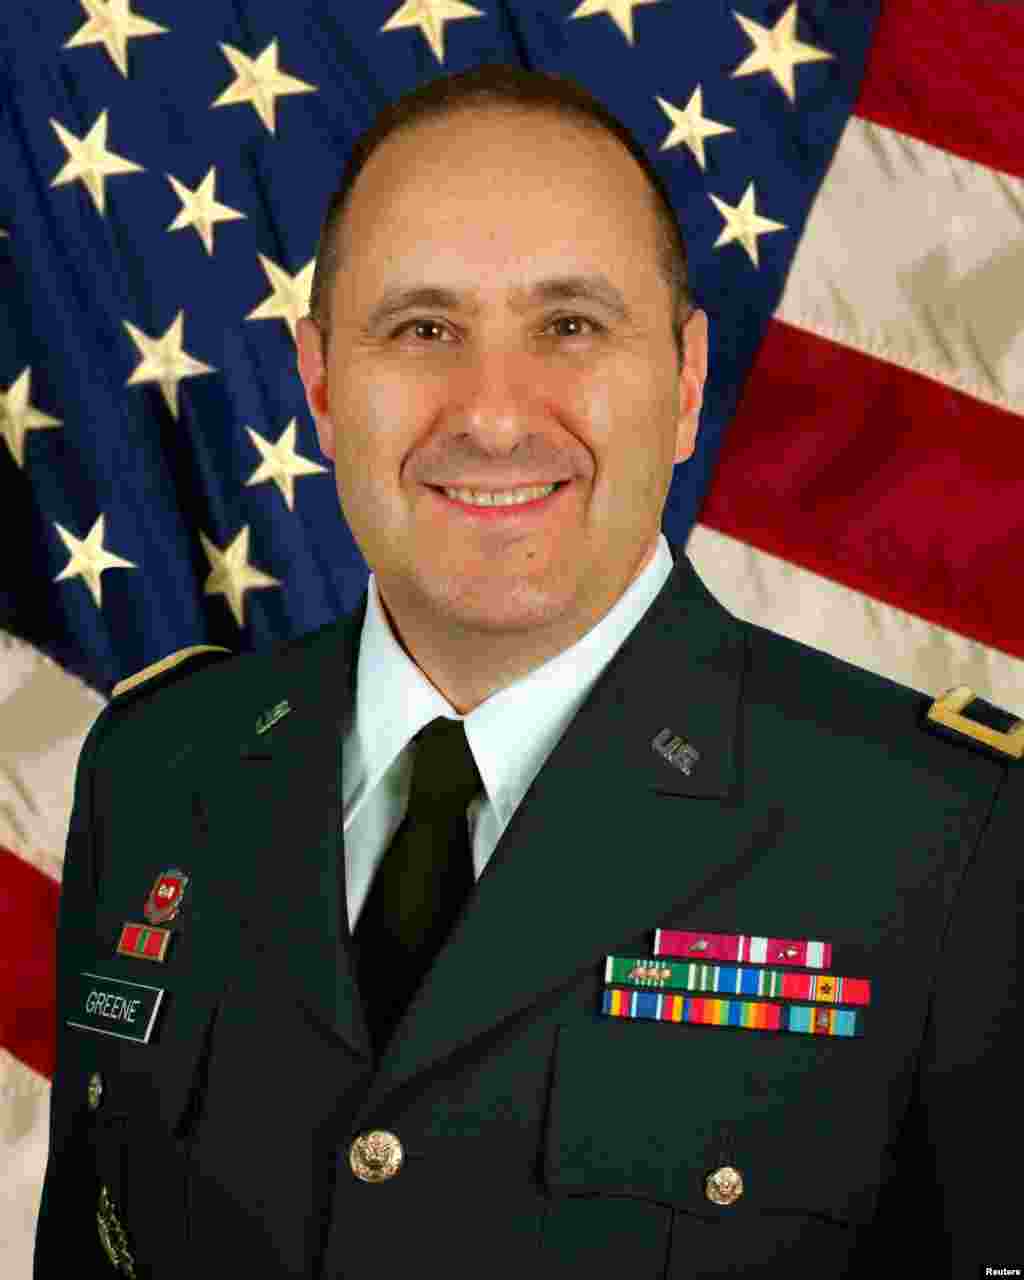 U.S. Army Brigadier General Harold J. Greene,&nbsp; the two-star Army general who was the highest-ranking U.S. military officer to be killed in either of America&#39;s post-9/11 wars. He was an engineer who rose through the ranks as an expert in developing and fielding the Army&#39;s war material.